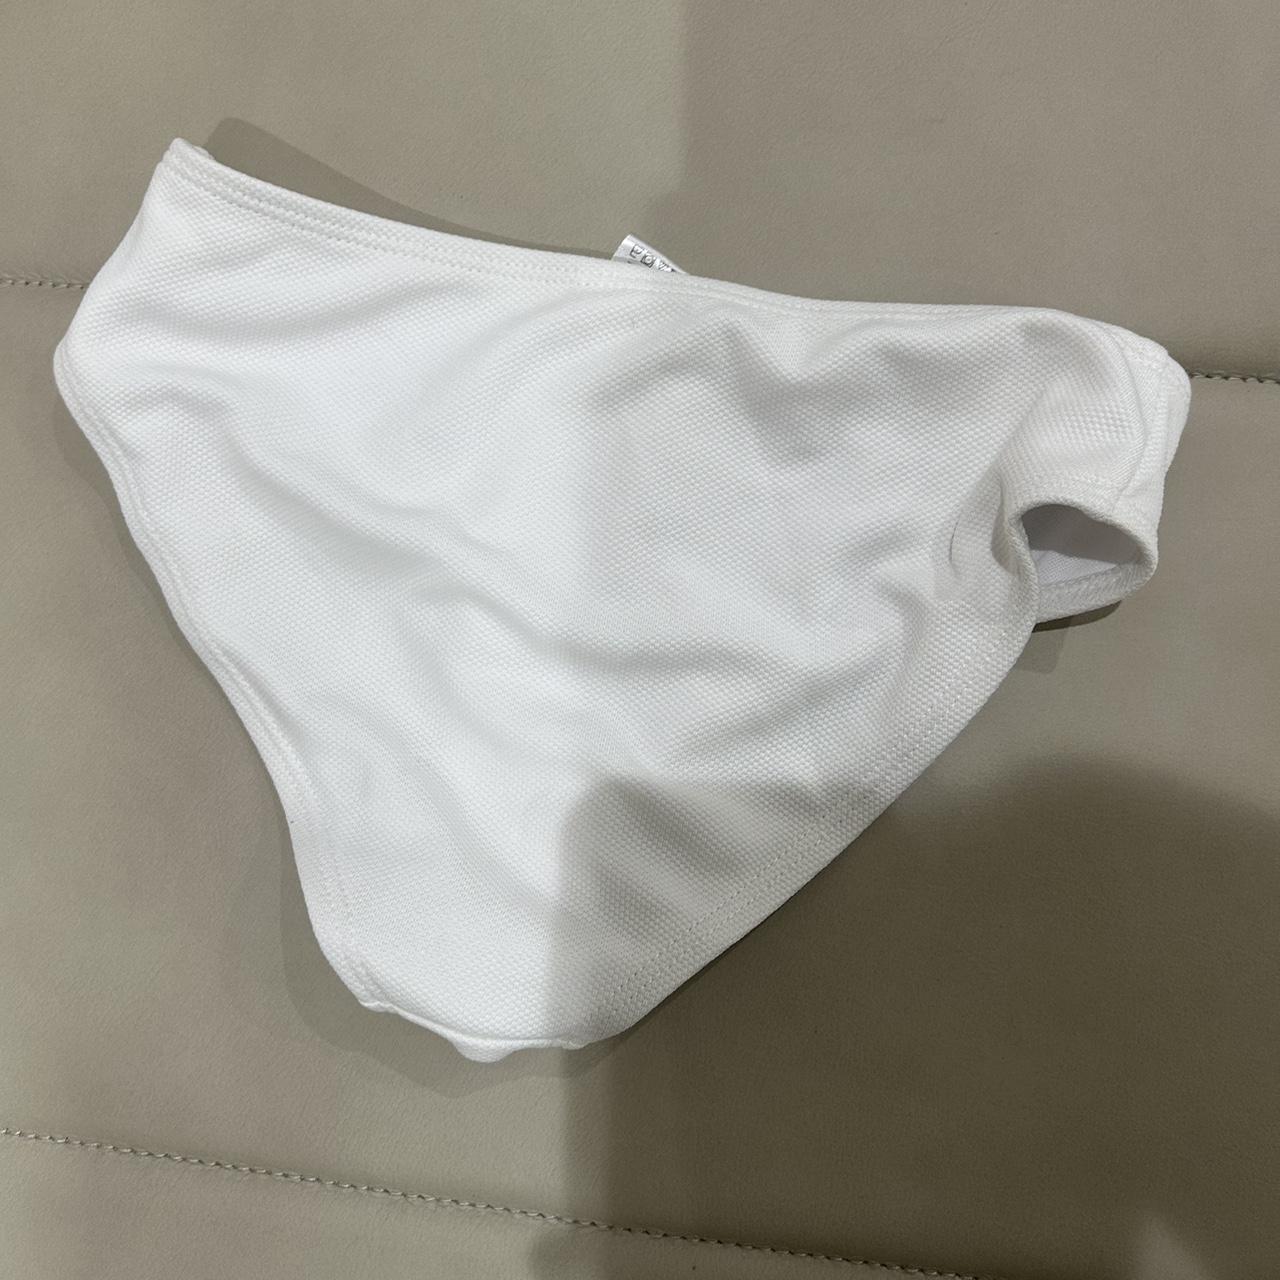 Small White swimsuit bottoms - Depop